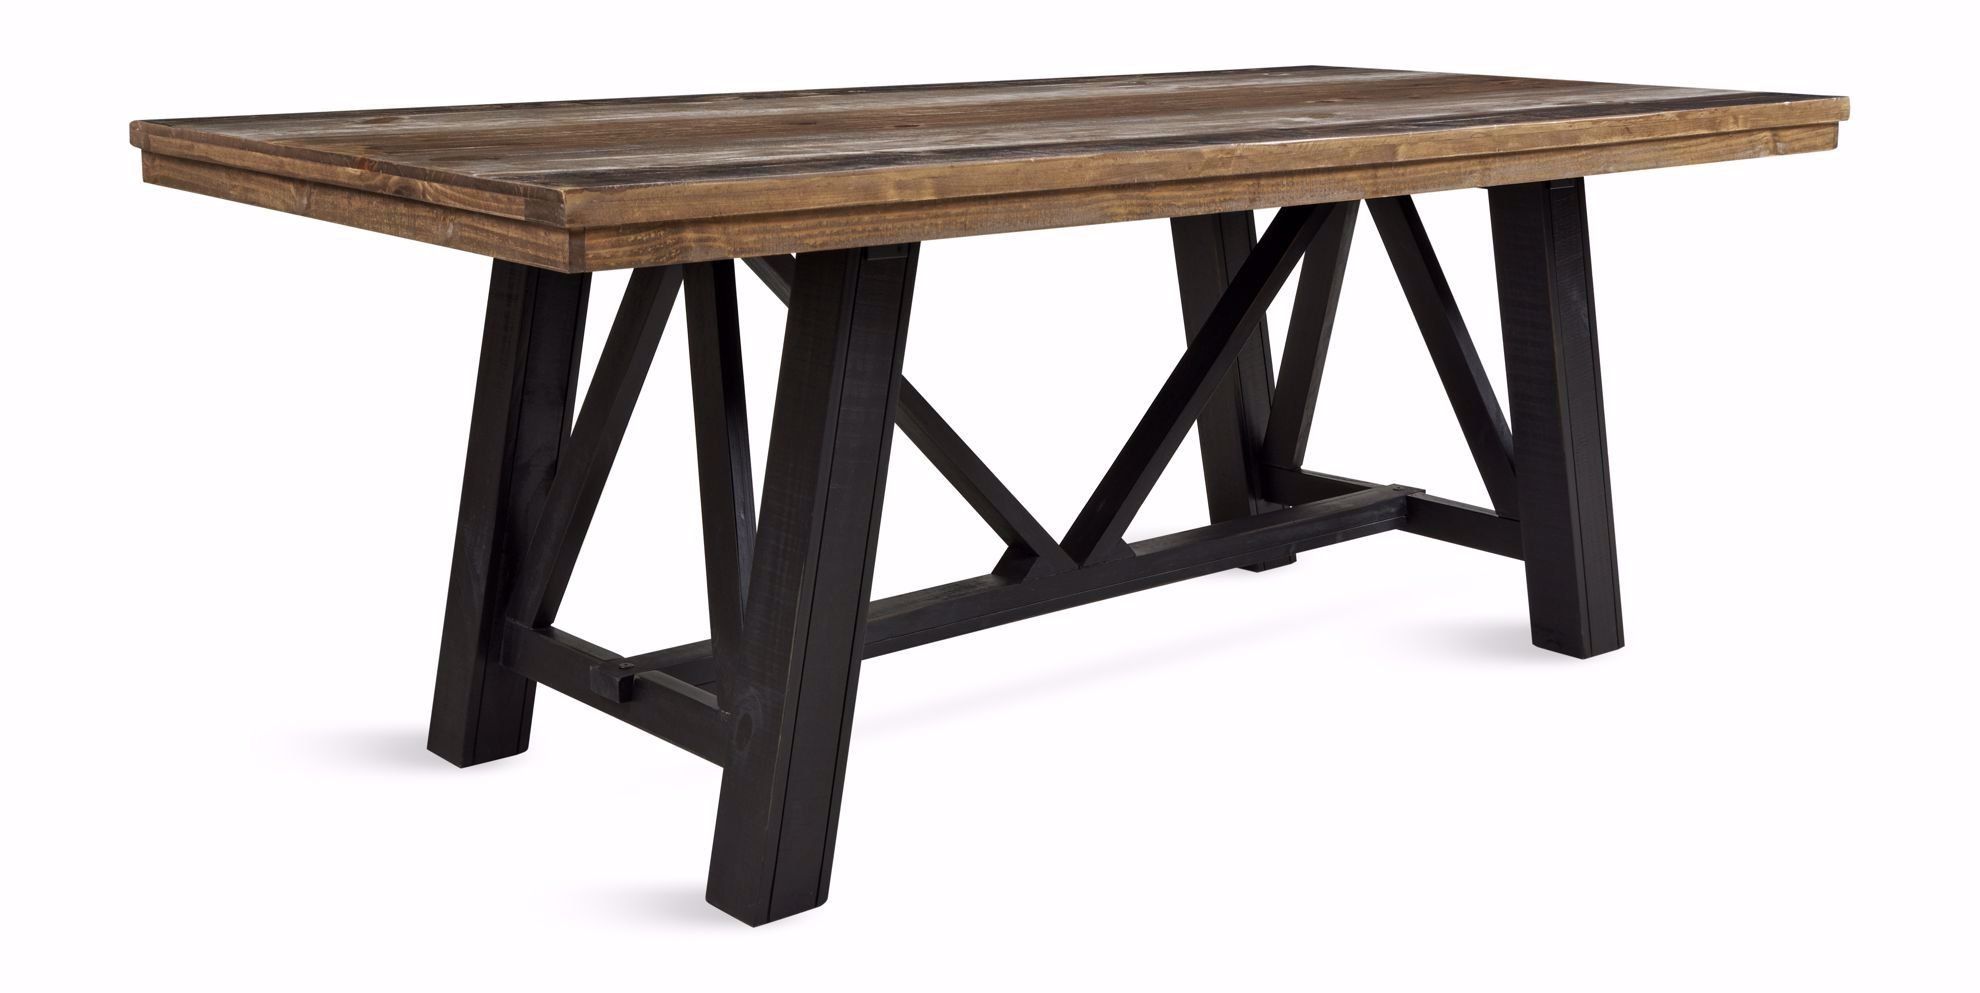 Loft Brown Dining Table